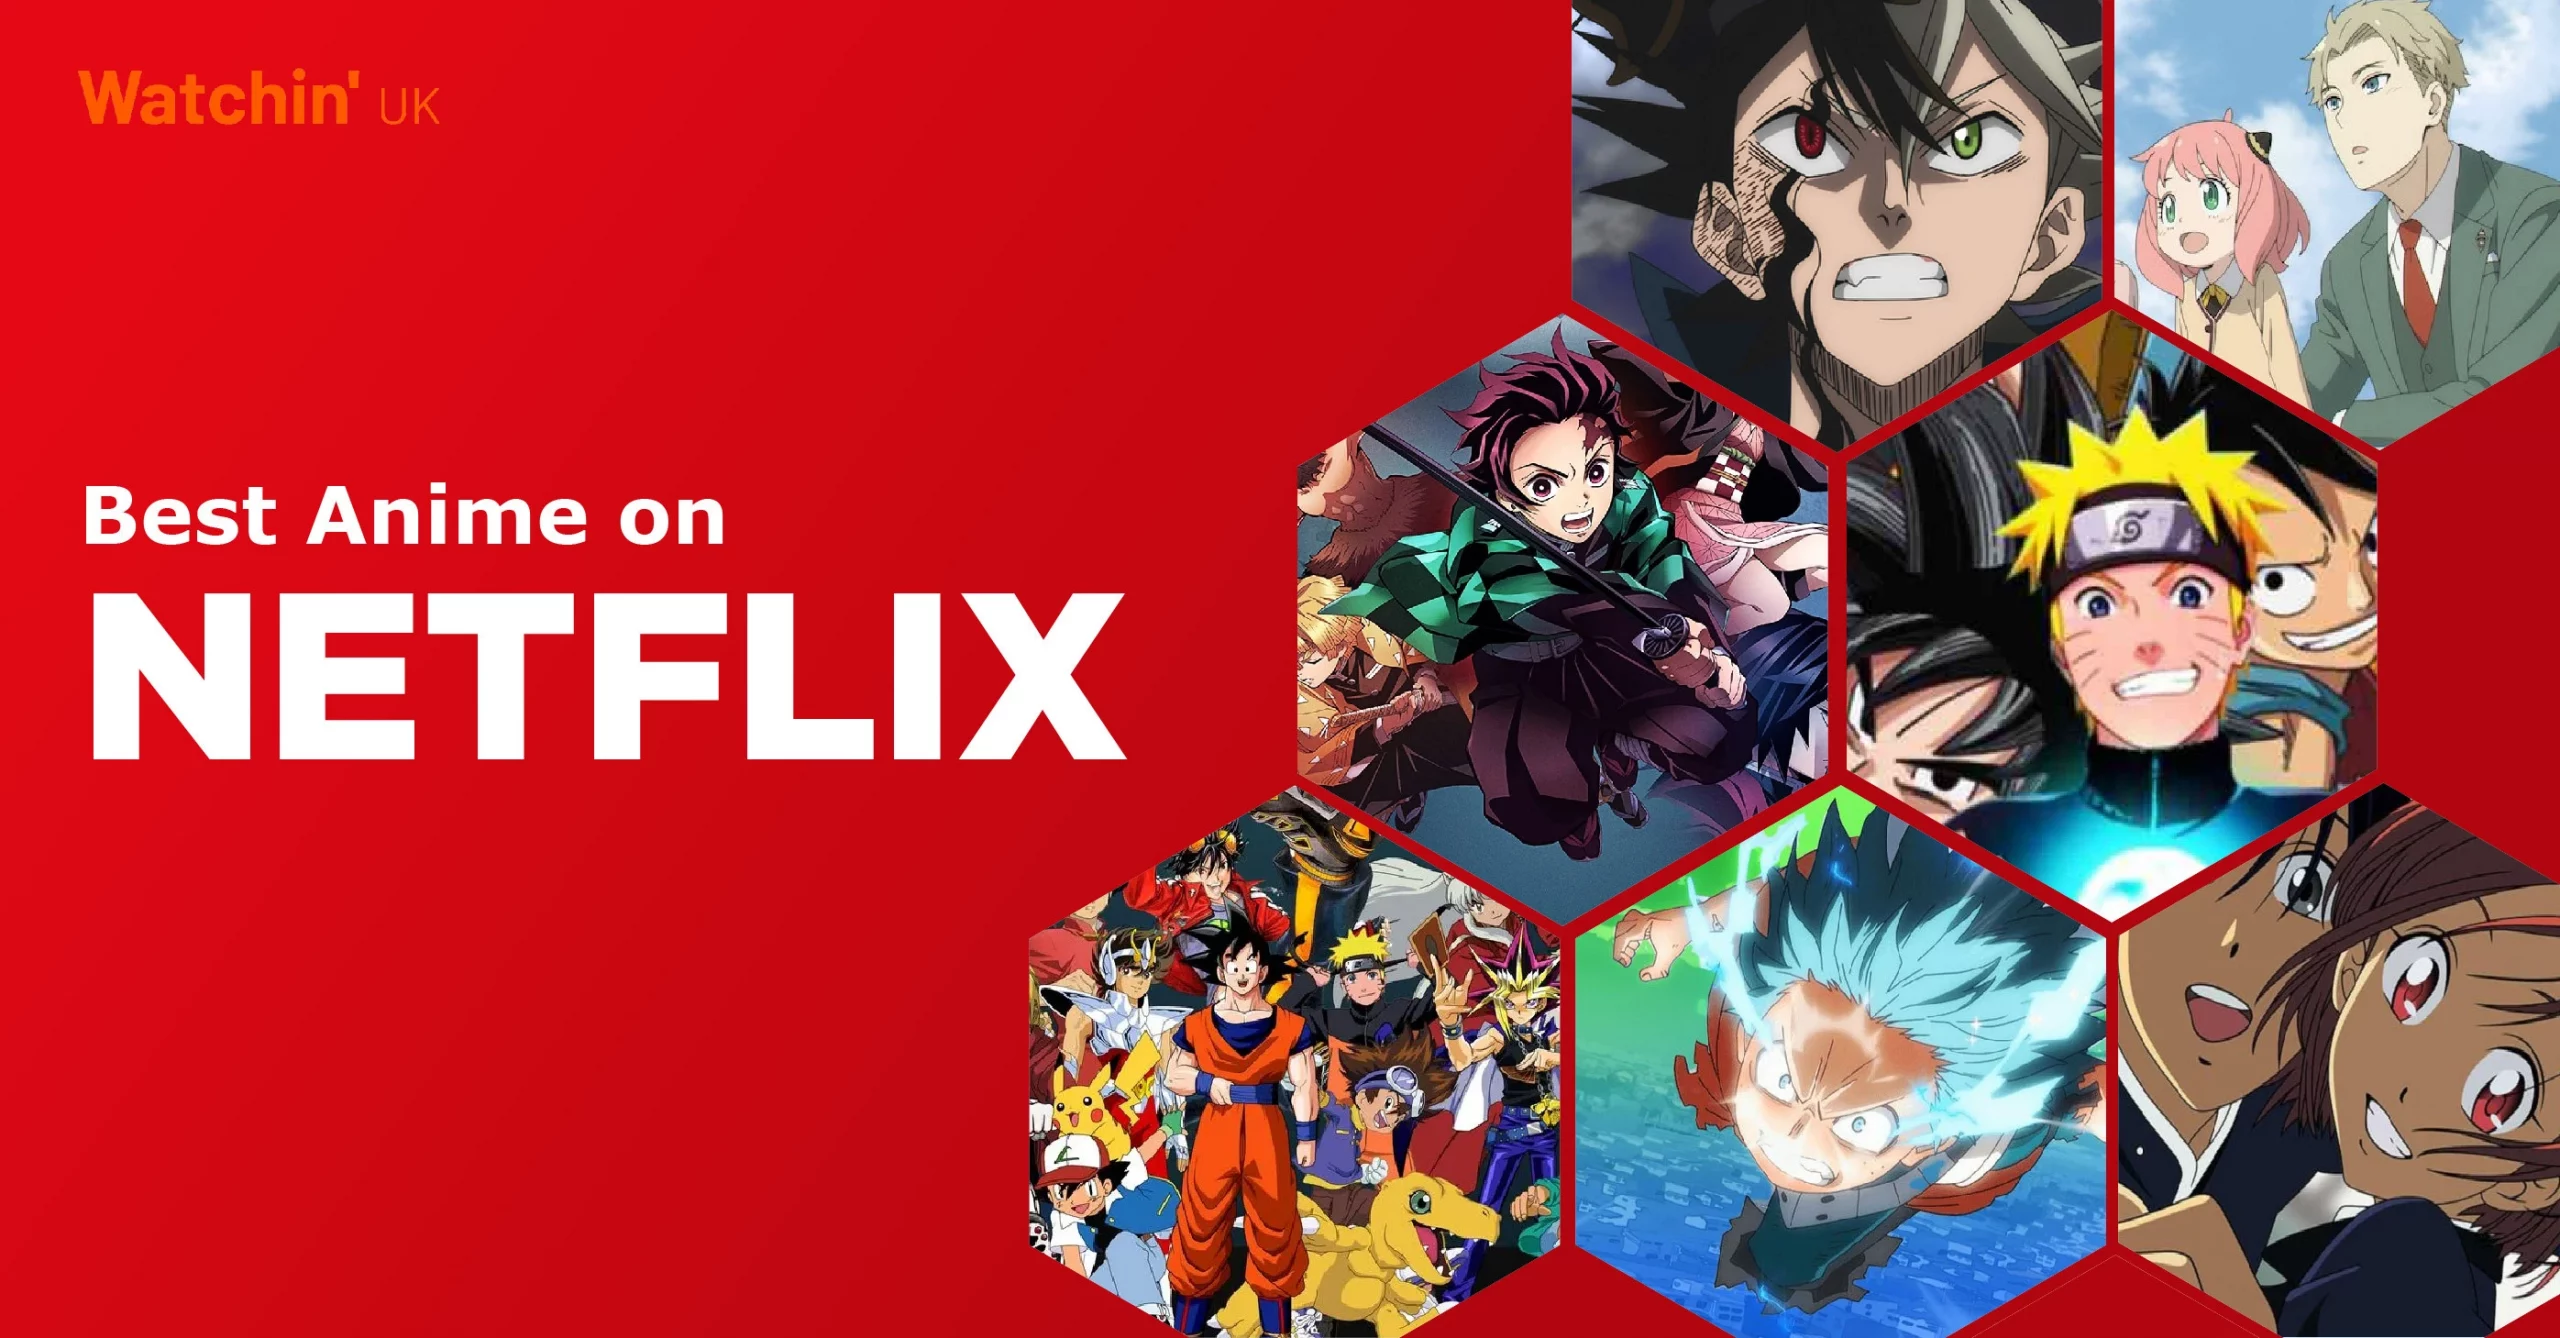 Best Anime on Netflix in UK to watch in August 2022